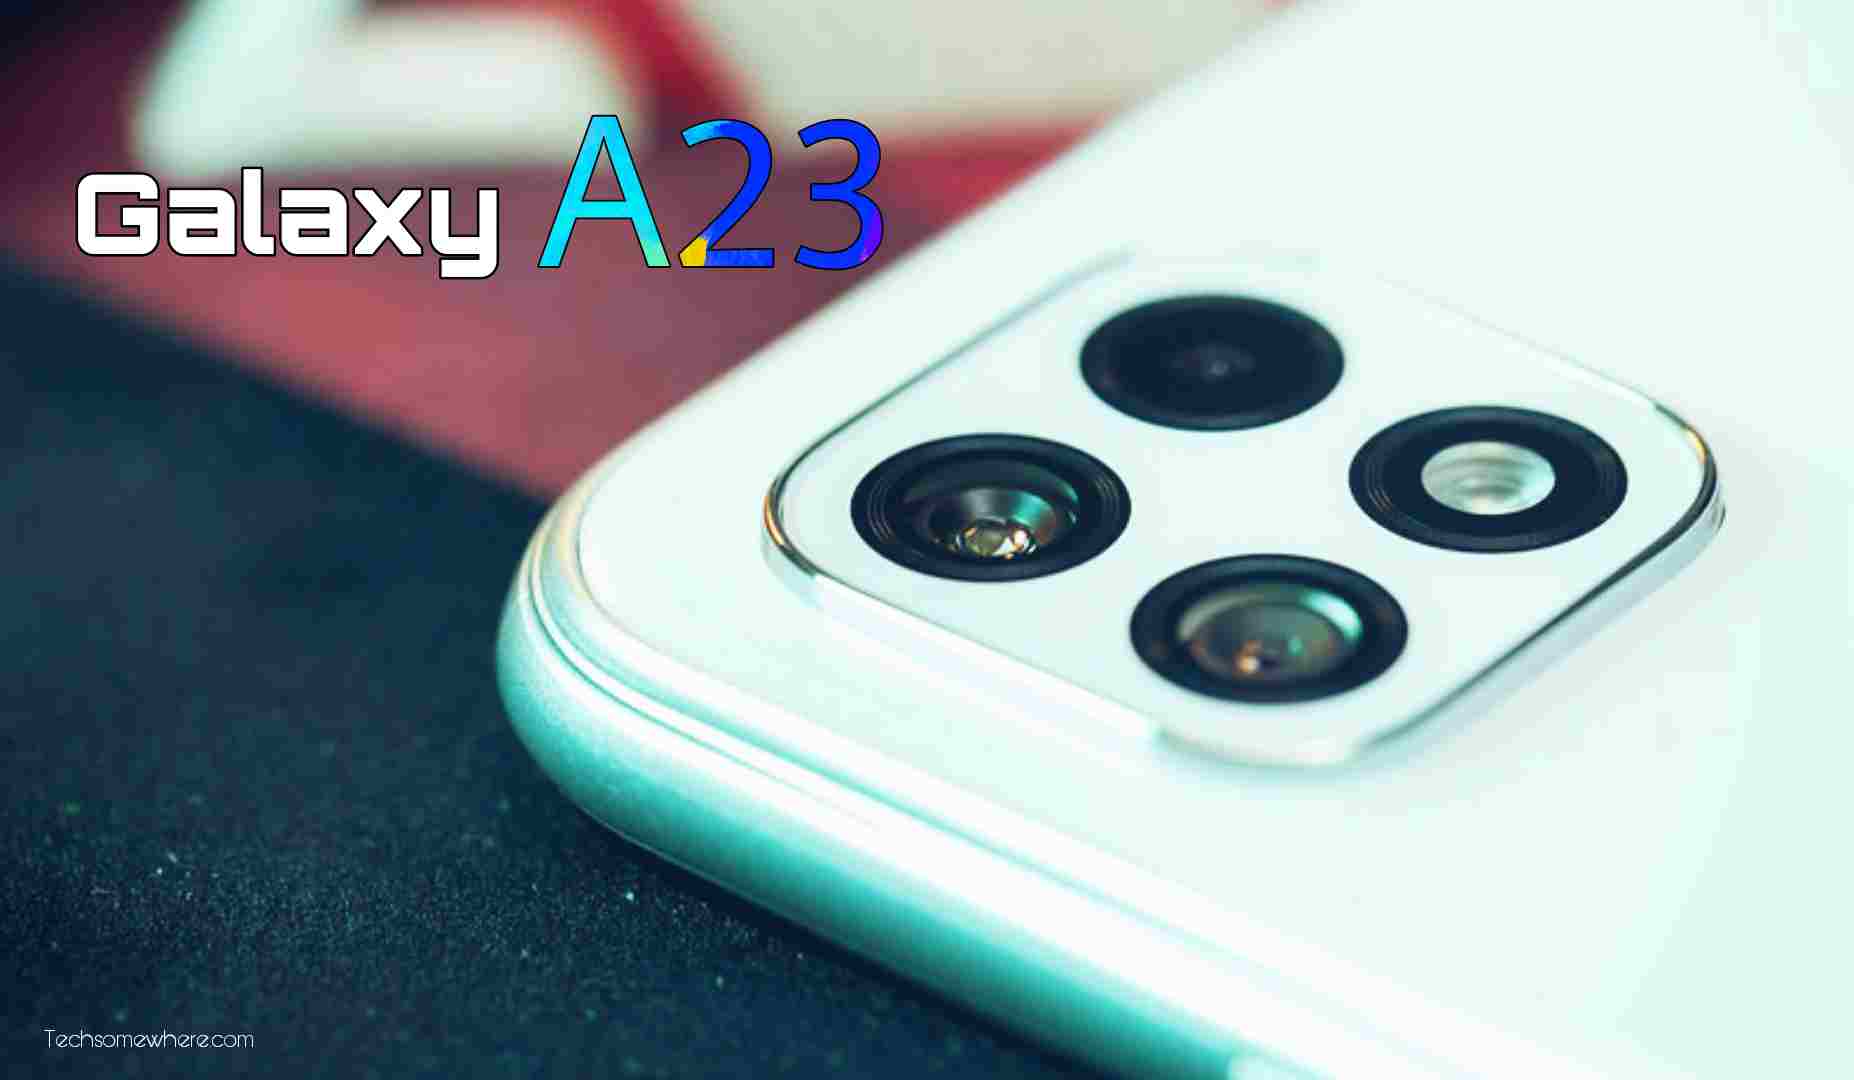 Samsung Galaxy A23 5G Price In UK with Full Specs & Release Date